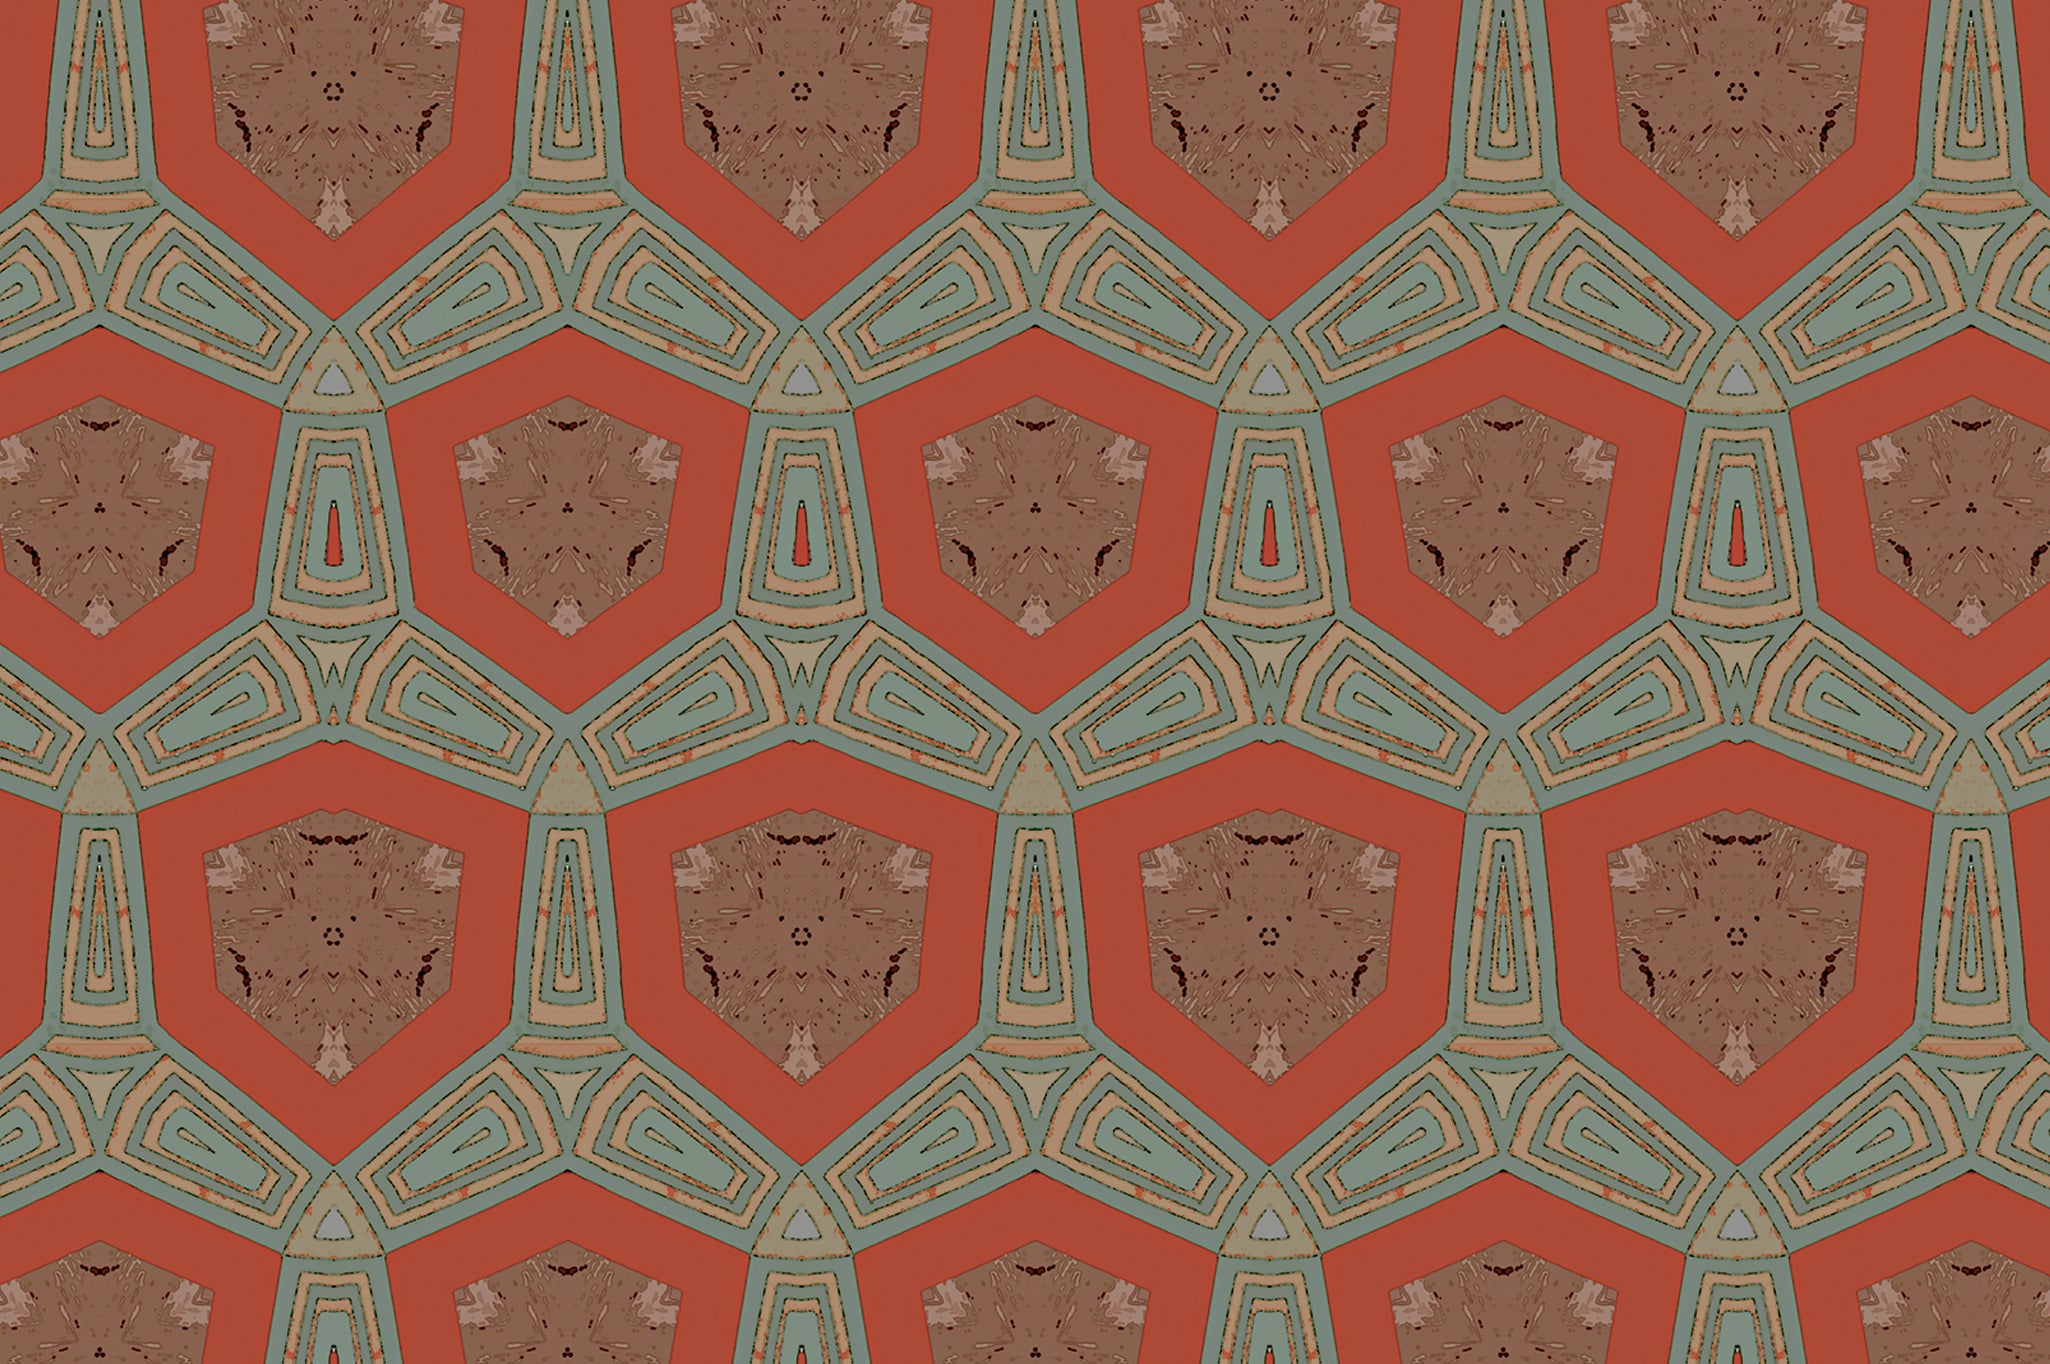 Detail of fabric in a geometric tribal print in shades of turquoise, brown and tan on a red field.